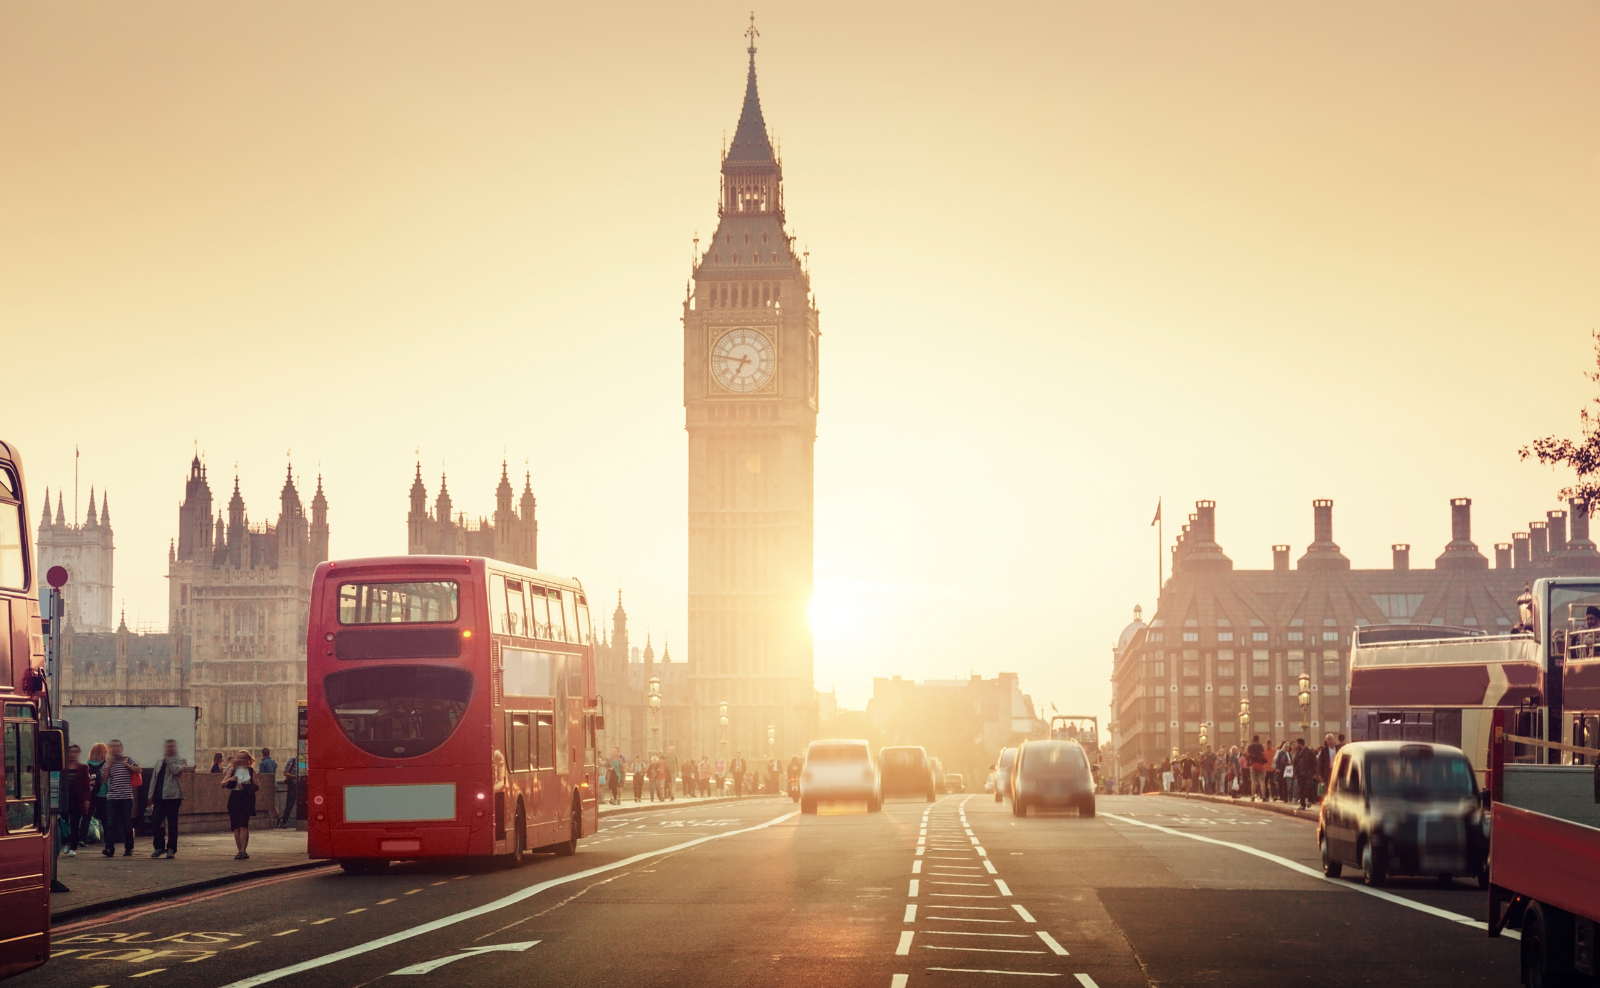 westminster bridge at sunset with the big ben clock tower and red double-decker buses